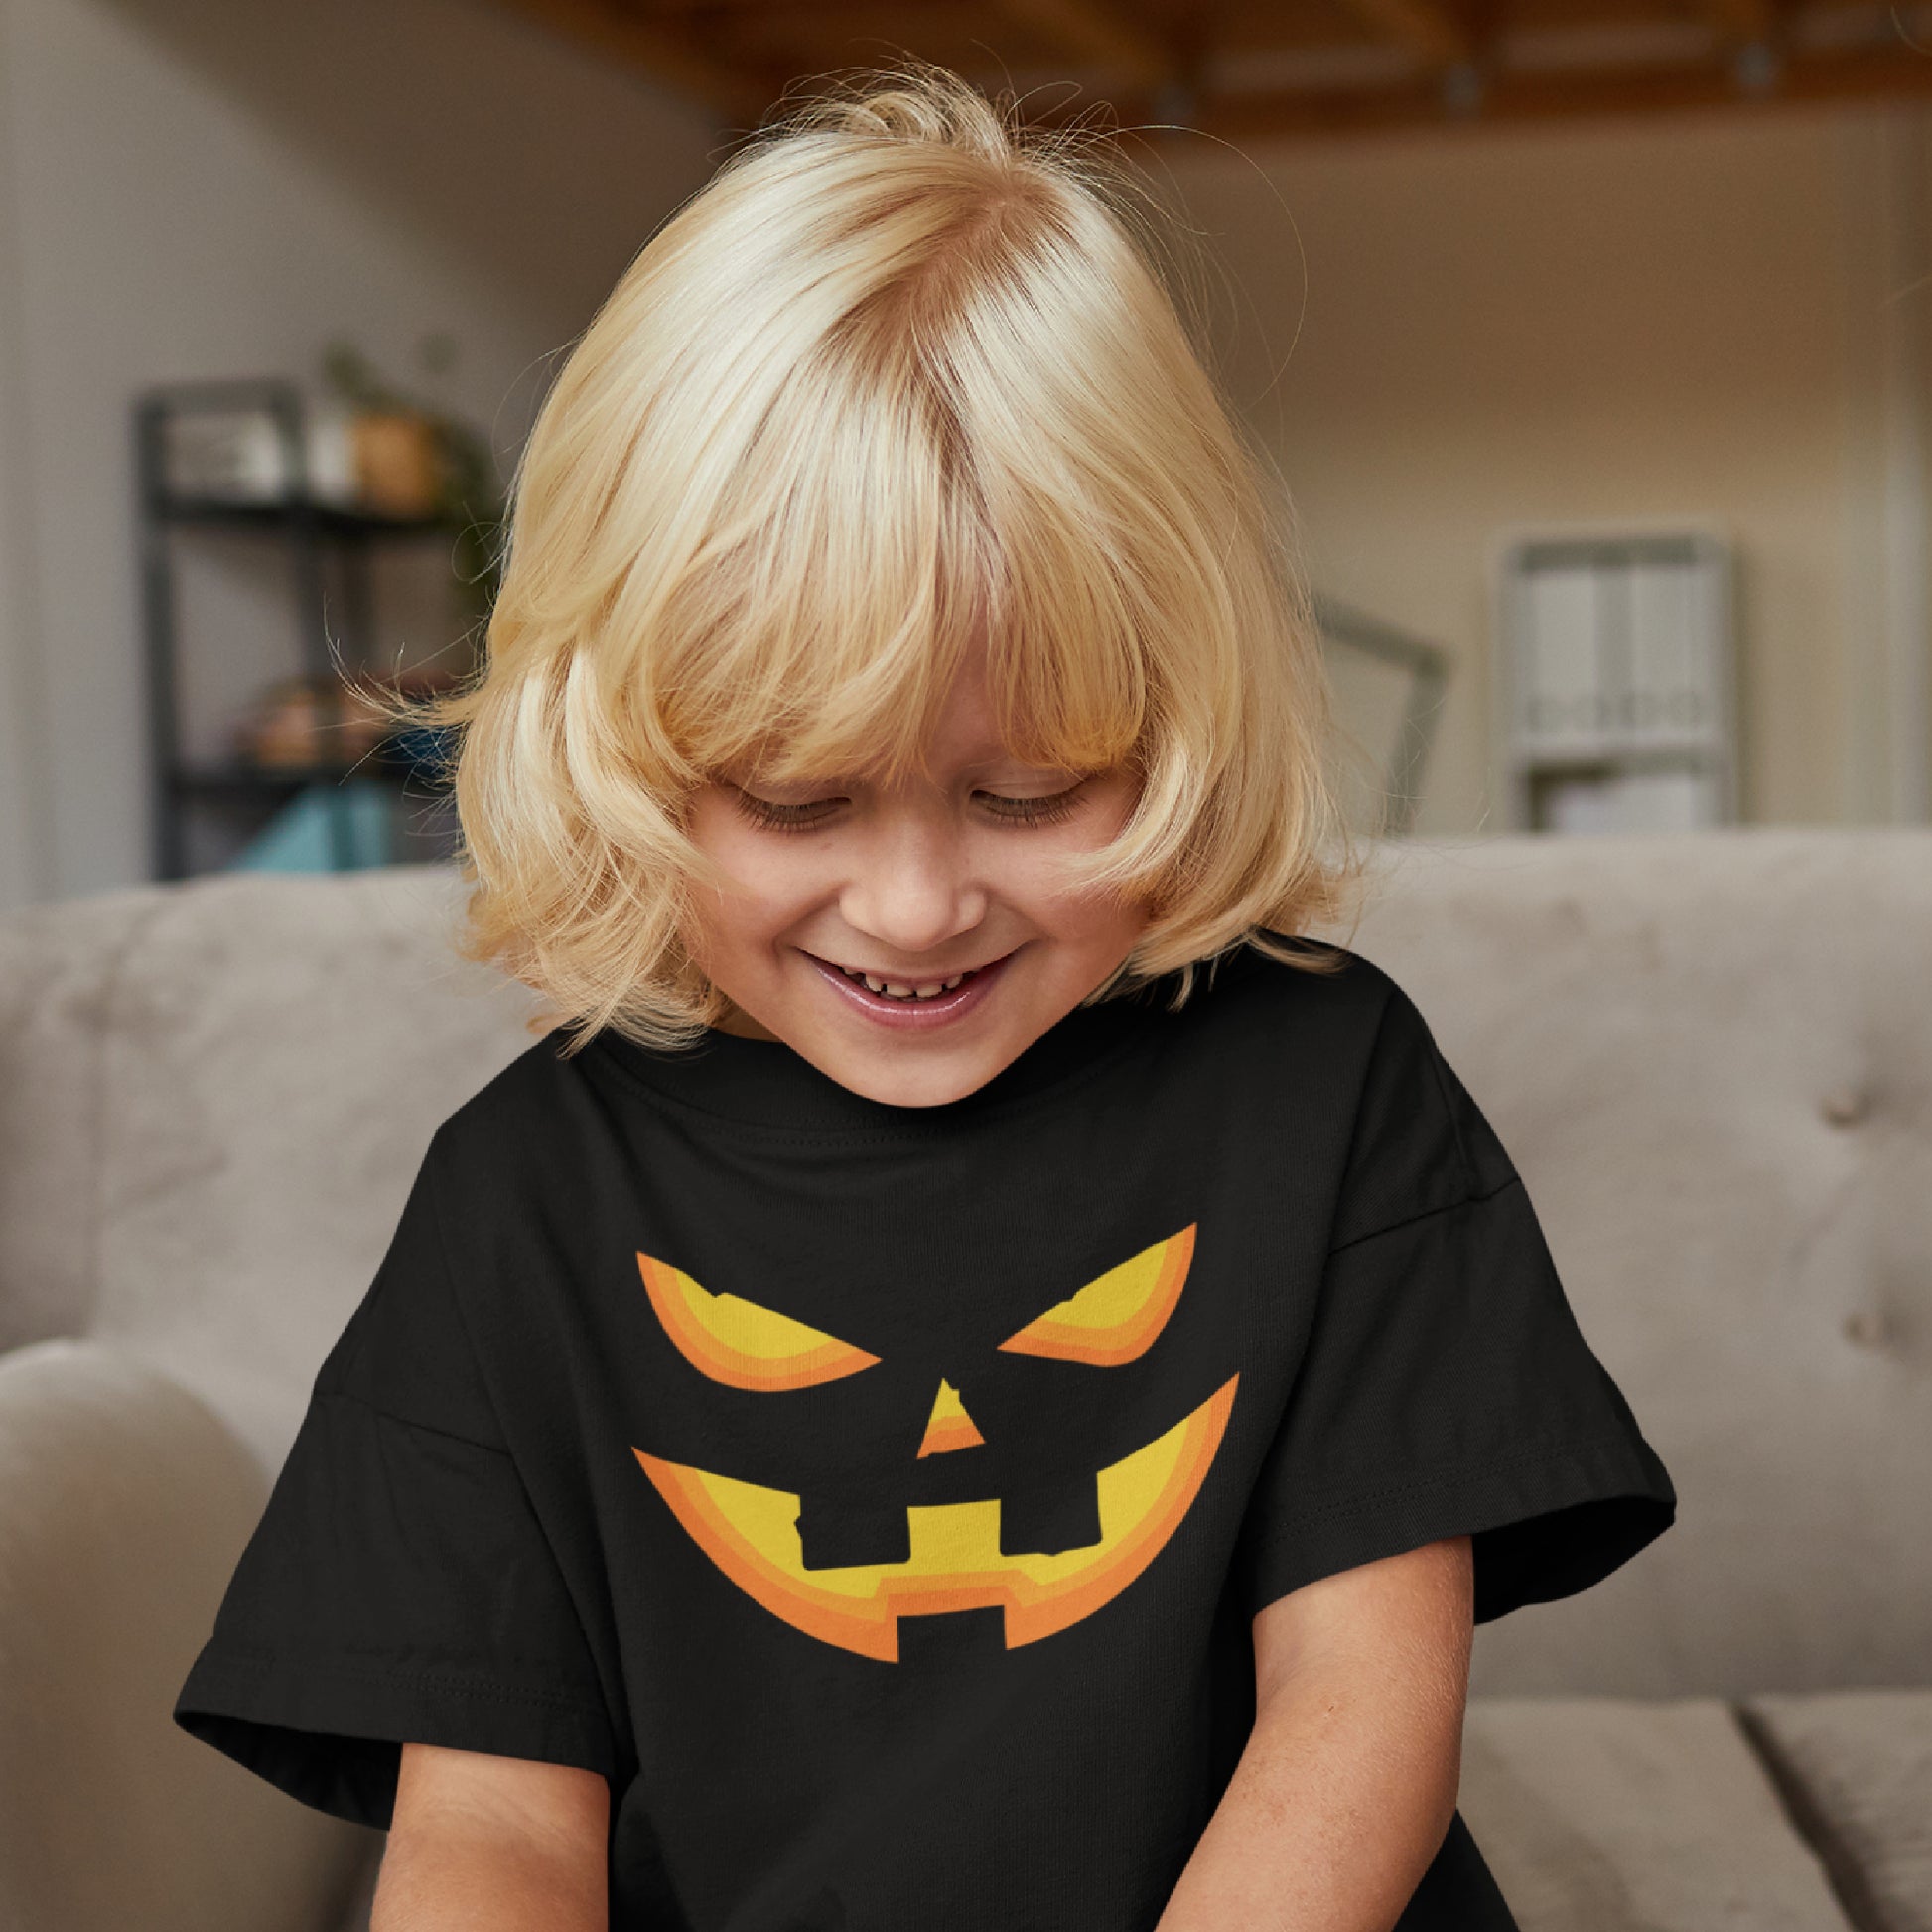 Mock up of a little girl with blond hair who is smiling and wearing our black Kids Halloween T-shirt featuring a Pumpkin Face.